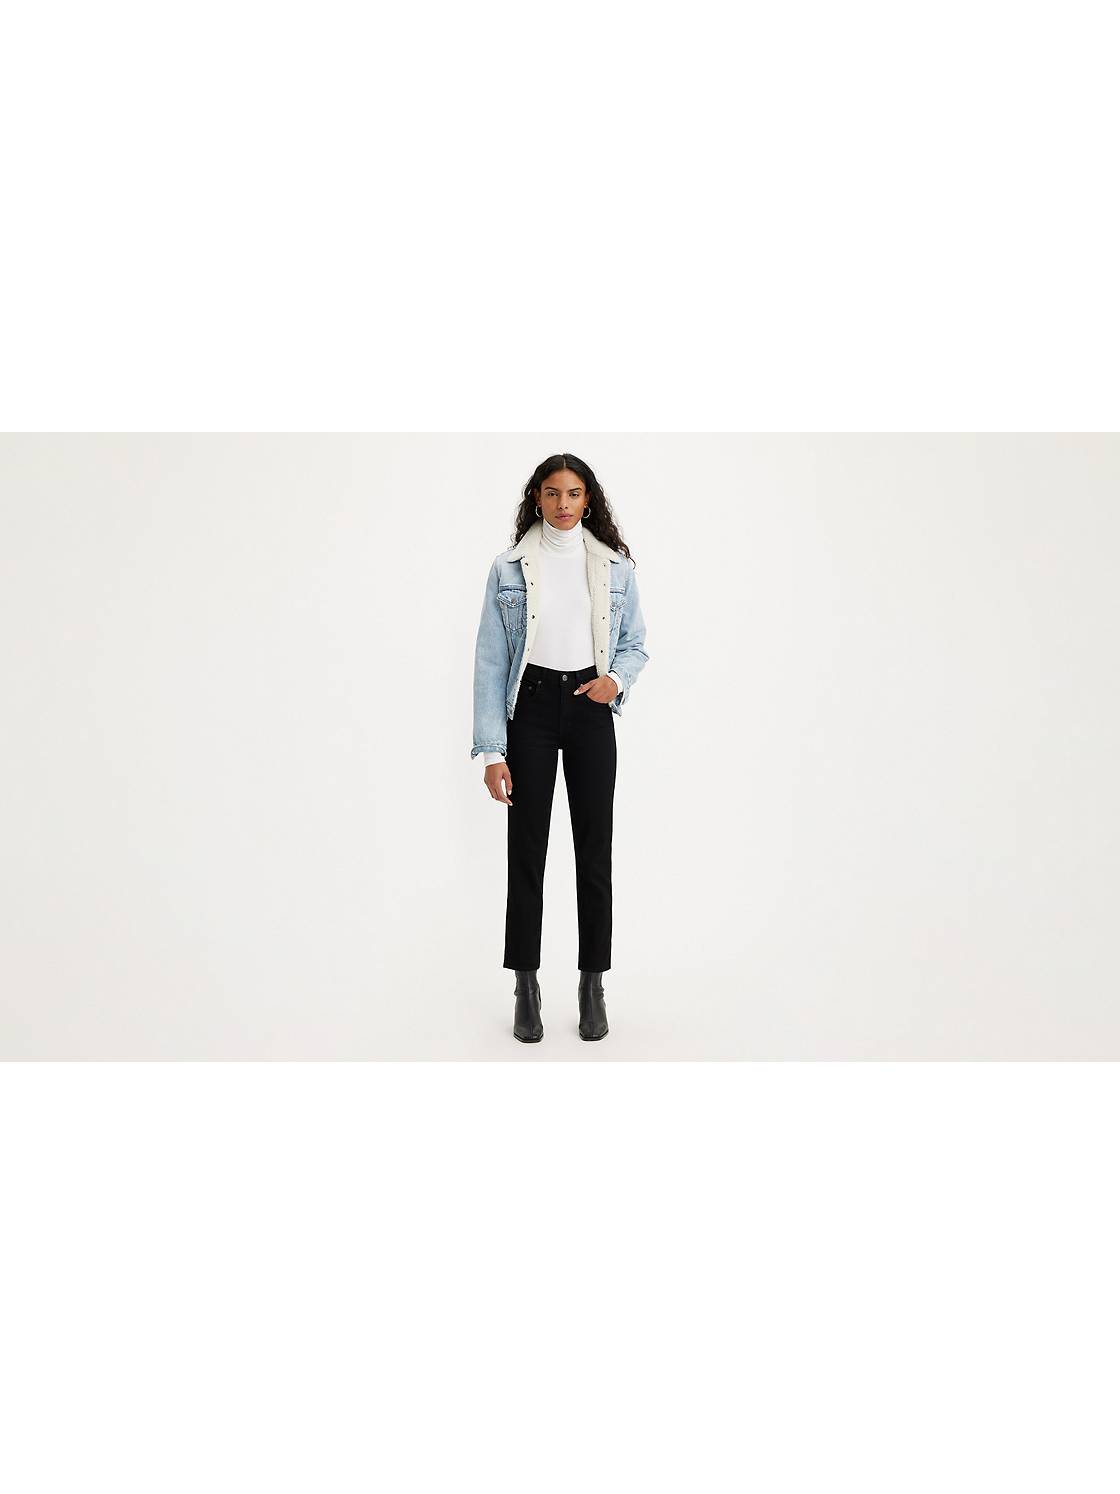 Tall Women's Jeans: Women's Tall Skinny Jeans & More